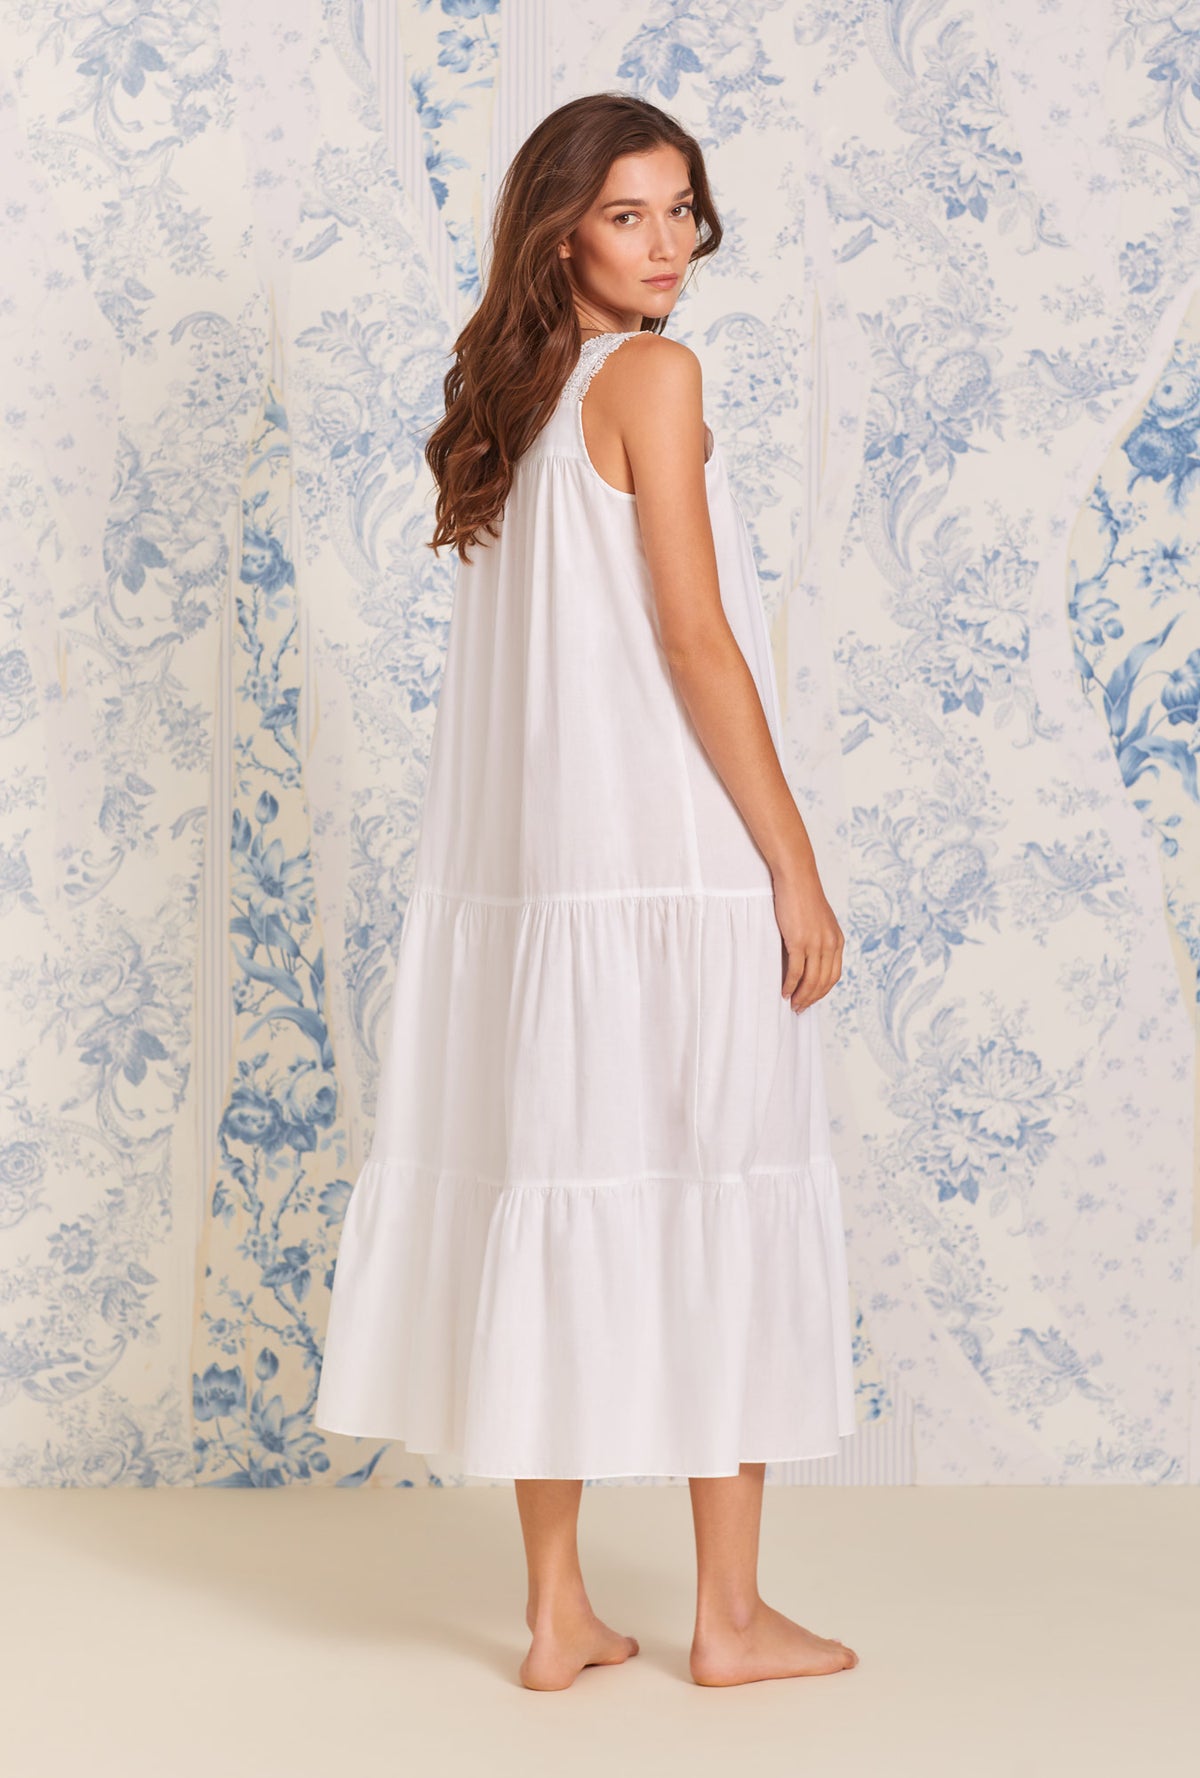 A lady wearing white sleeveless classic nightgown